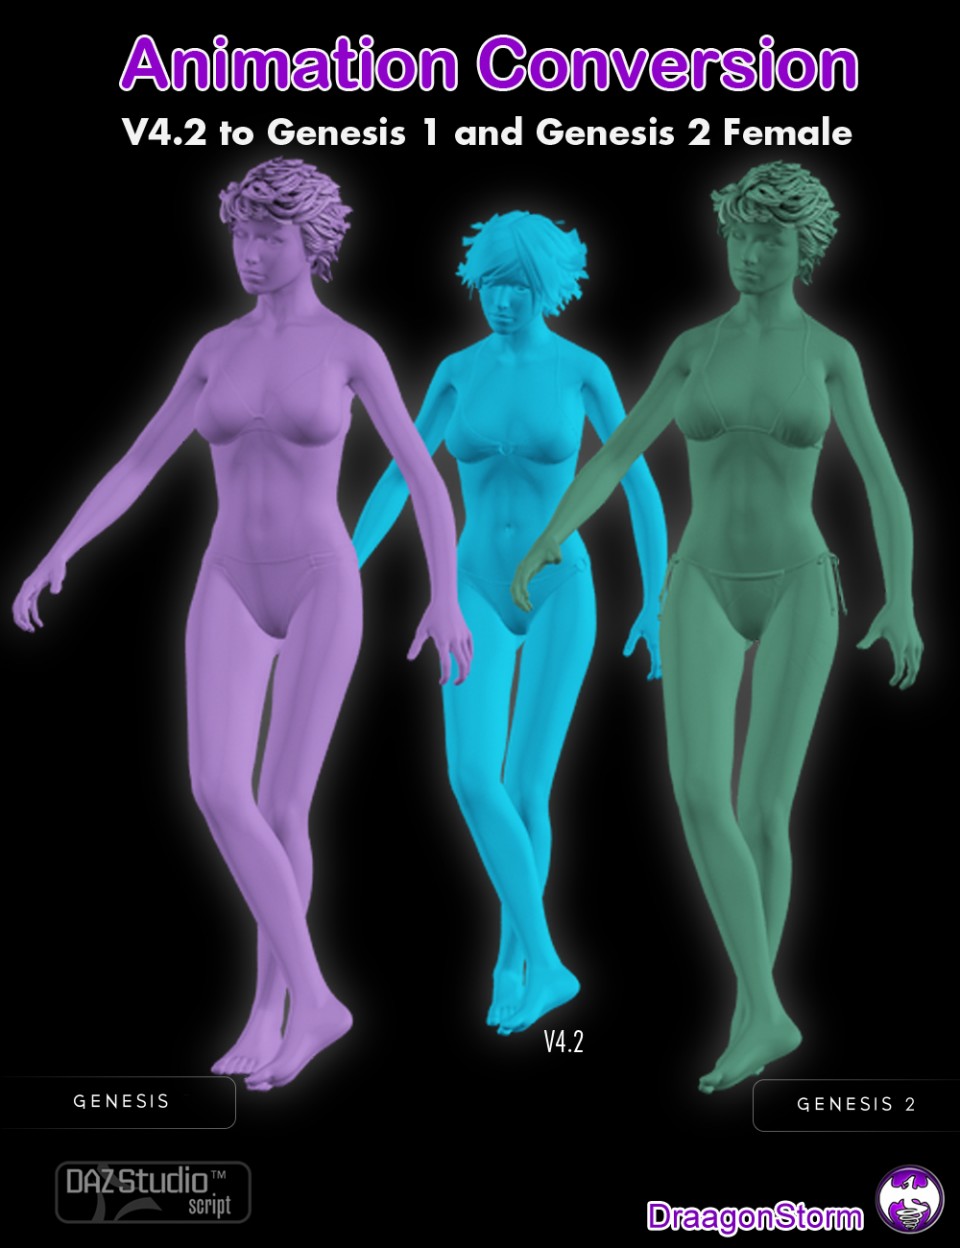 Animation Conversion V4.2 to Genesis and Genesis 2 Female